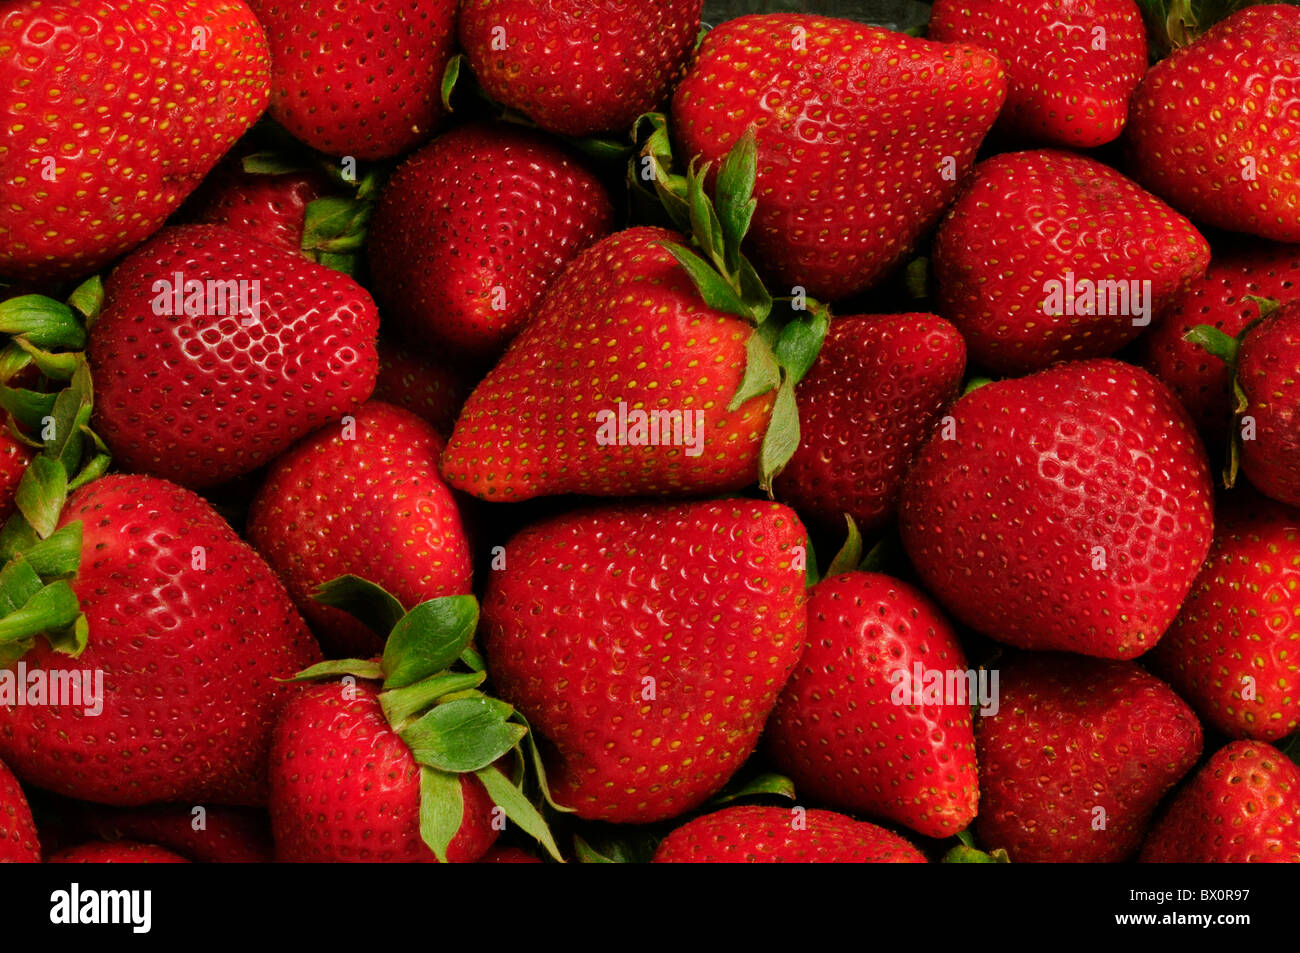 Pile of red strawberries filling frame Stock Photo